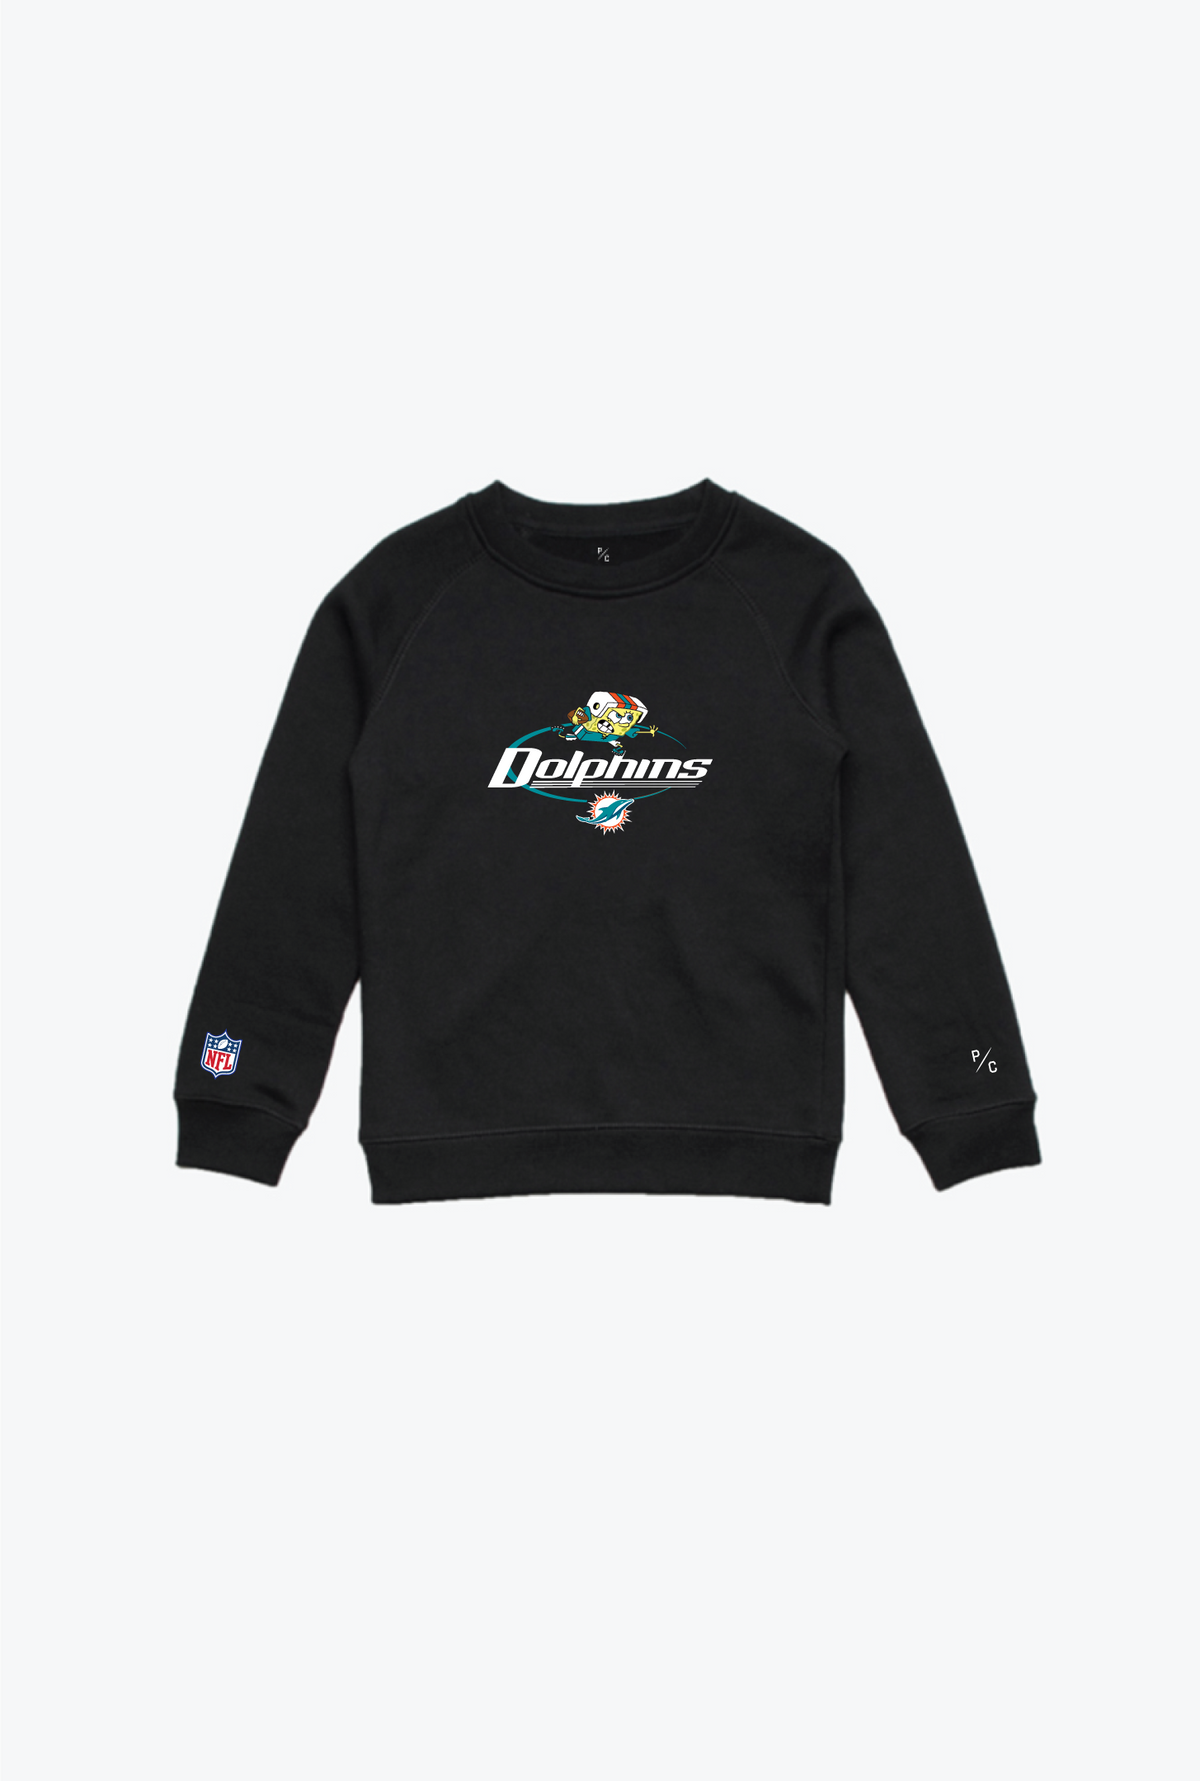 NFL x Nickelodeon Kids Embroidered Crewneck - Miami Dolphins